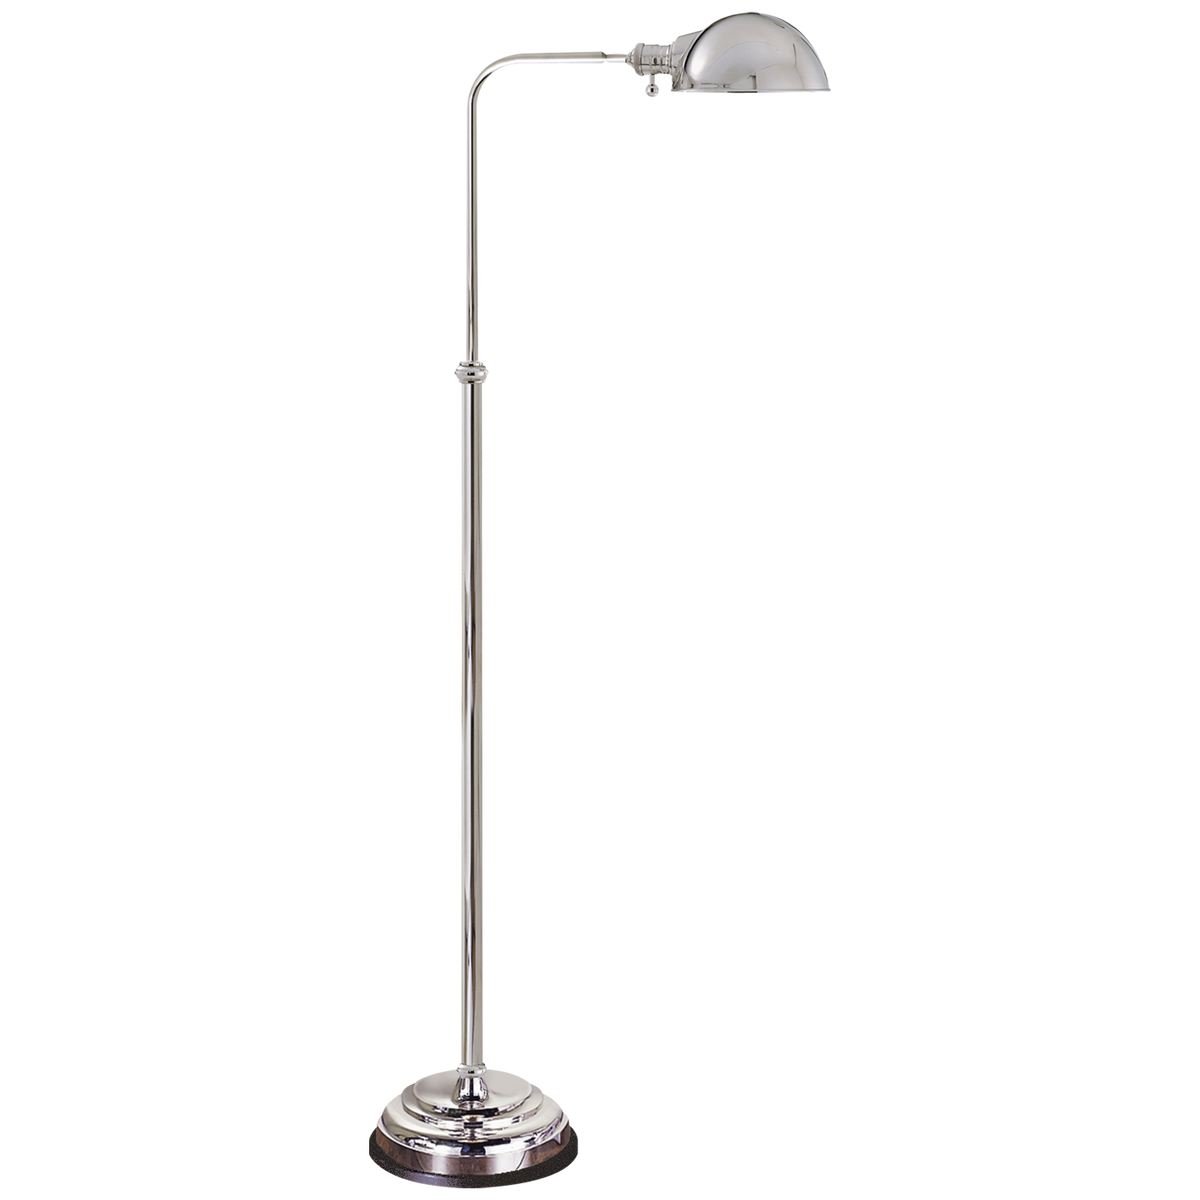 Apothecary Floor Lamp - Polished Nickel